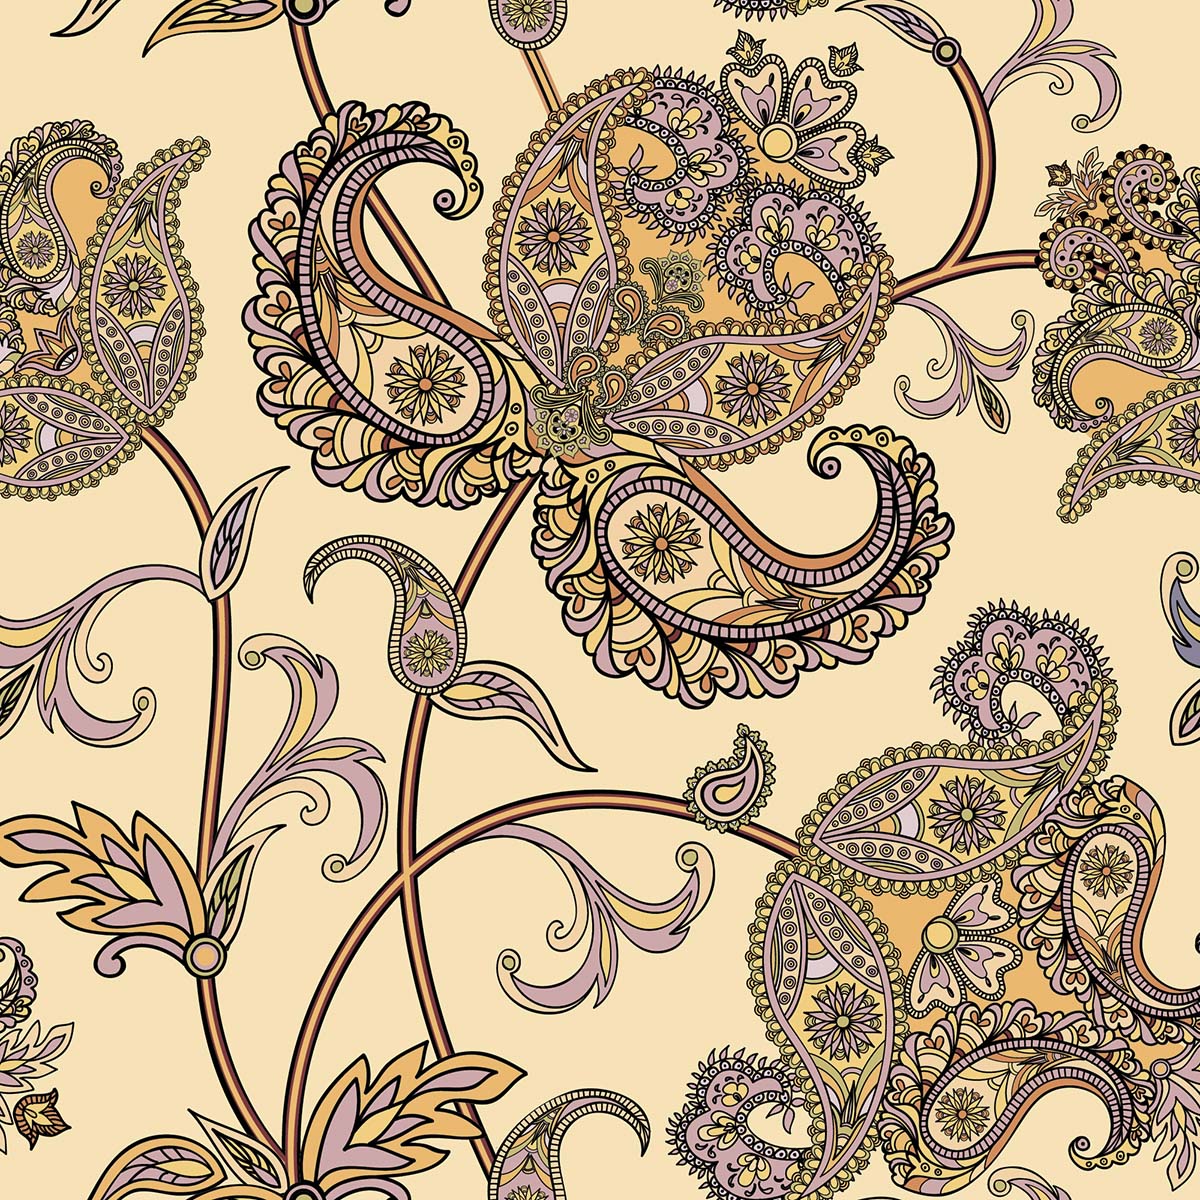 A pattern of paisleys and flowers